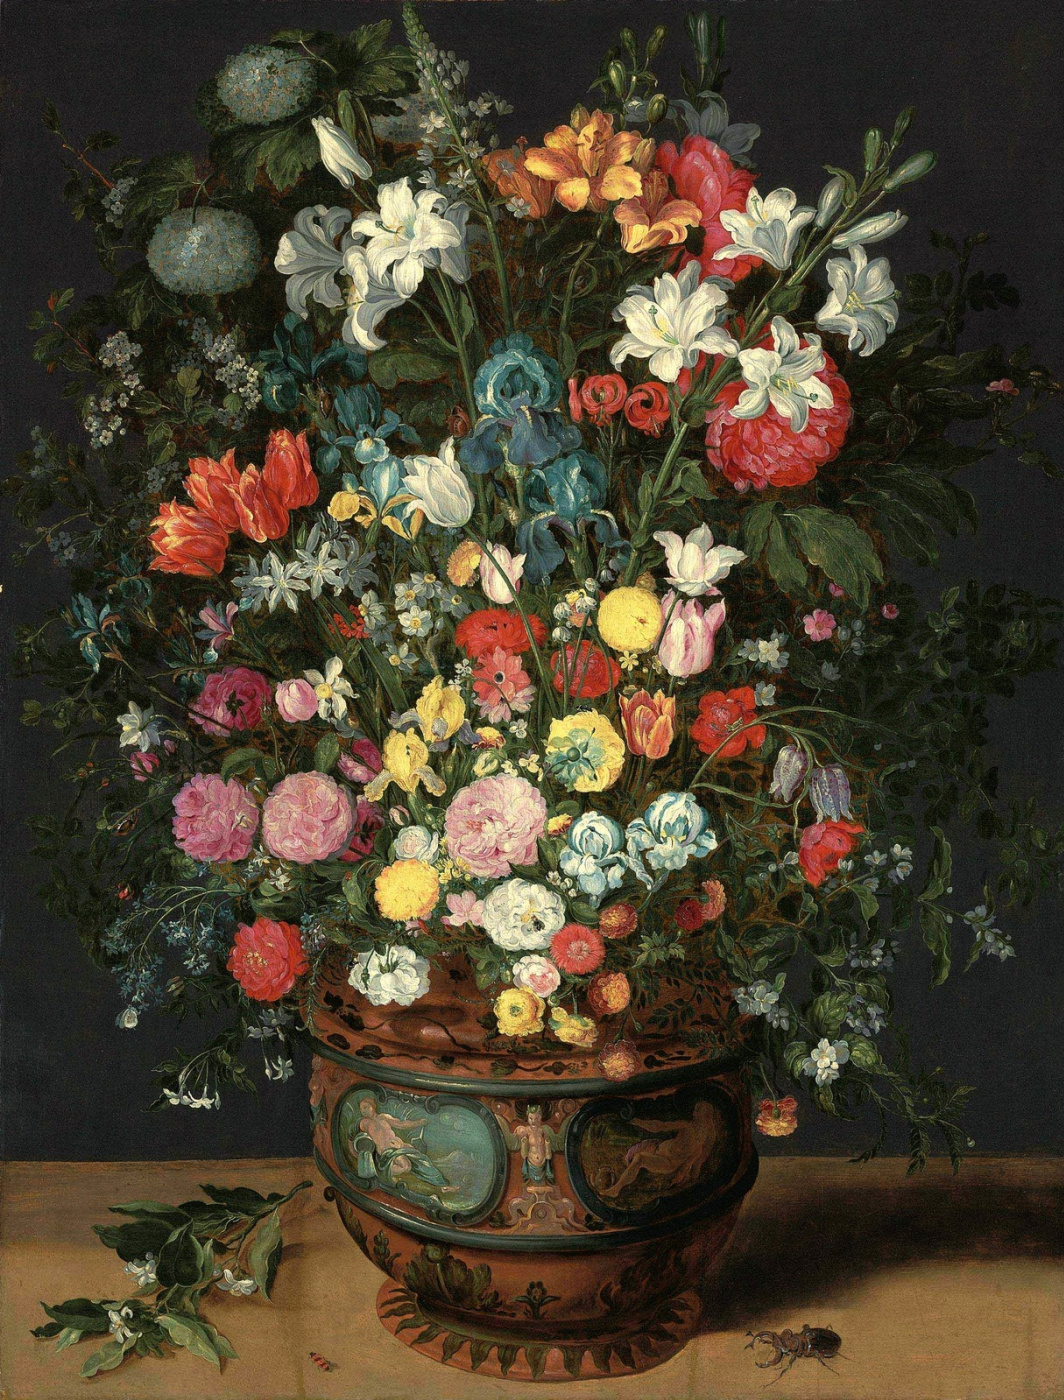 Jan Brueghel the Younger. A large bouquet of lilies, irises, tulips, orchids and peonies in a vase decorated with images of Amphitrite and Ceres